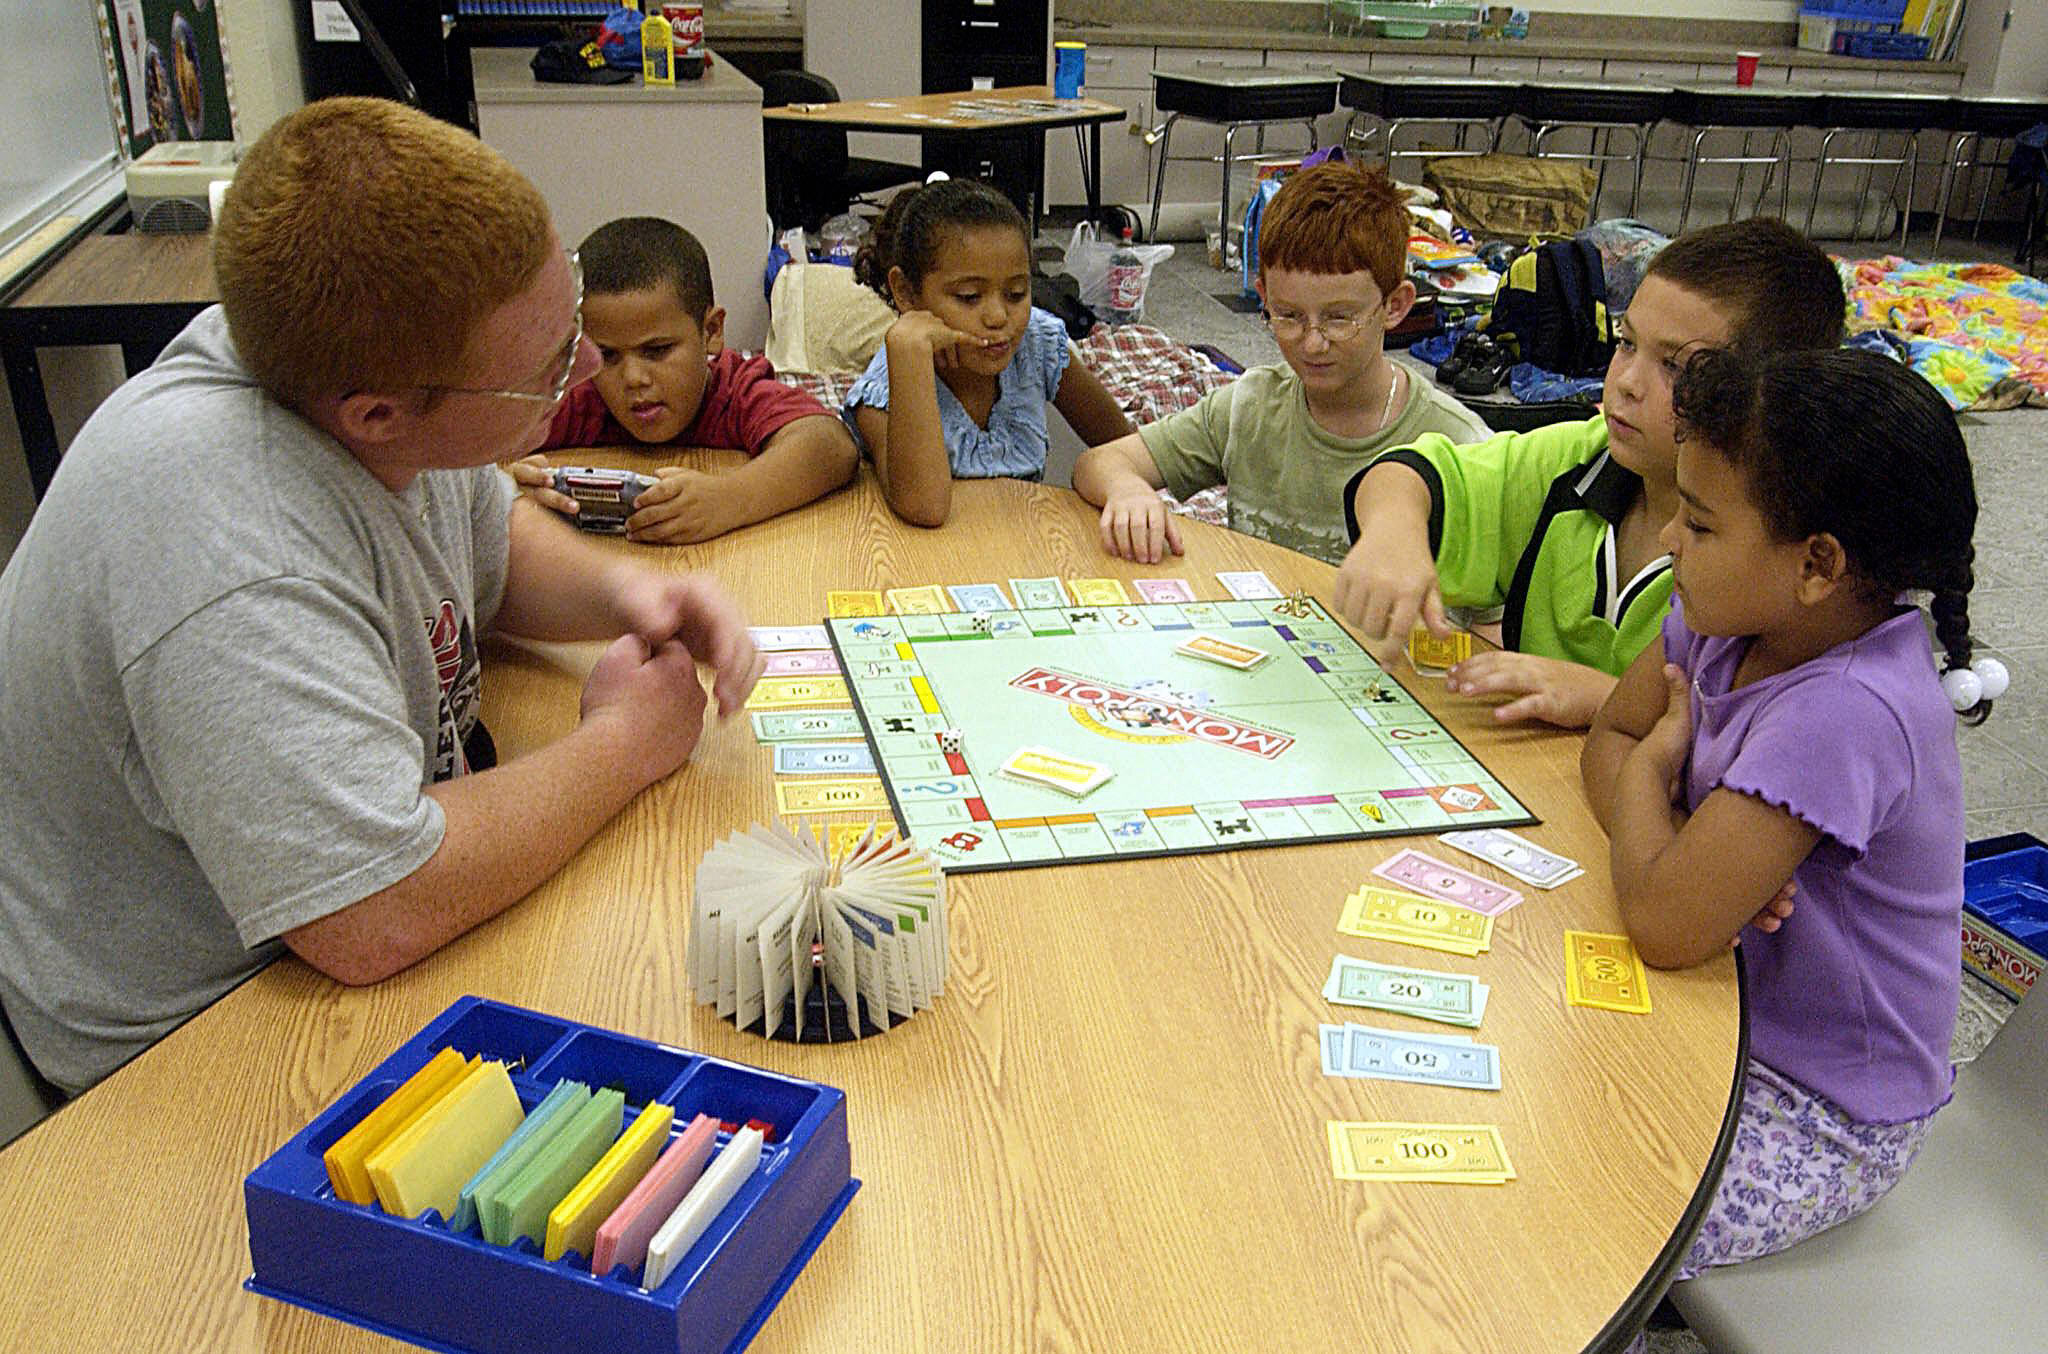 Robby Herto (L) helps the younger children (L-R) Tyler Leblant, Tiara McKelvin, Zackary Herto, Alex Leblant and Michaela McKelvin pass time with a game of Monopoly 04 September, 2004, in a classroom at Manatee elementary school near Melbourne, Florida. The school was opened as an emergency shelter and quickley filled to over 800 people in advance of approaching catagory 2 Hurricane Frances that is predicted to make landfall near Fort Pierce along Florida's East Central coast Saturday. AFP PHOTO/ Bruce WEAVER (Photo credit should read BRUCE WEAVER/AFP via Getty Images)